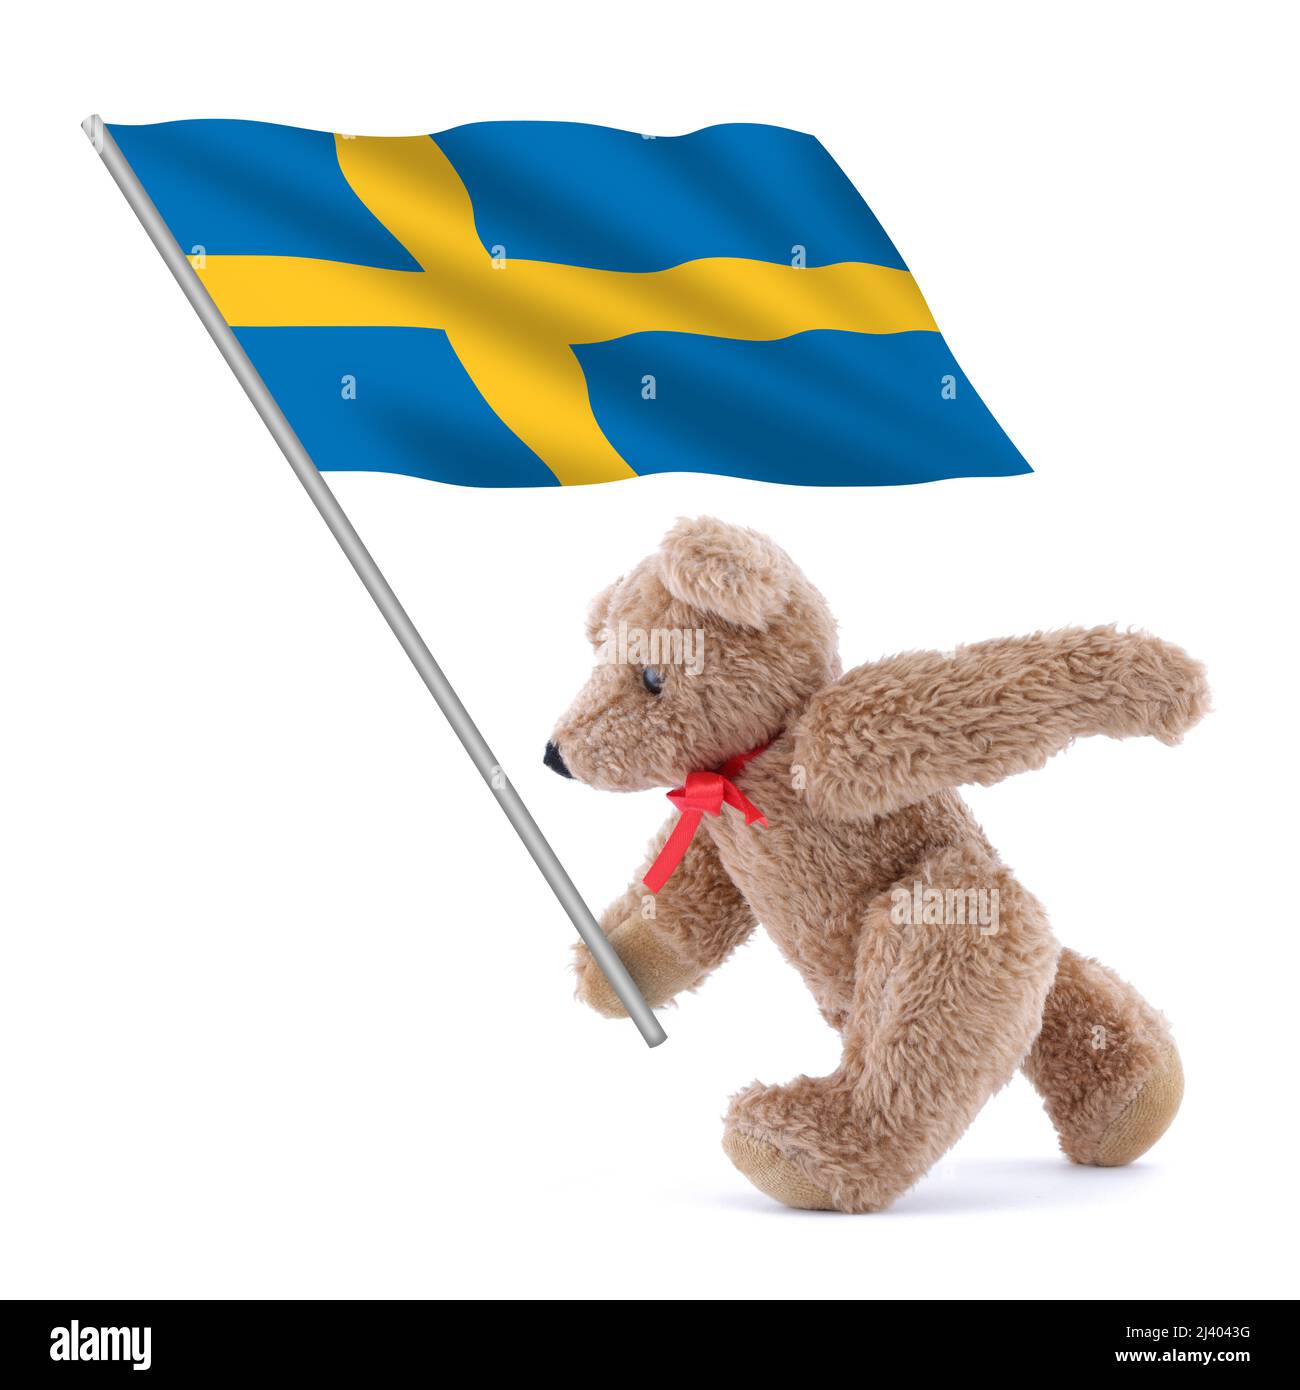 Sweden flag being carried by a cute teddy bear Stock Photo